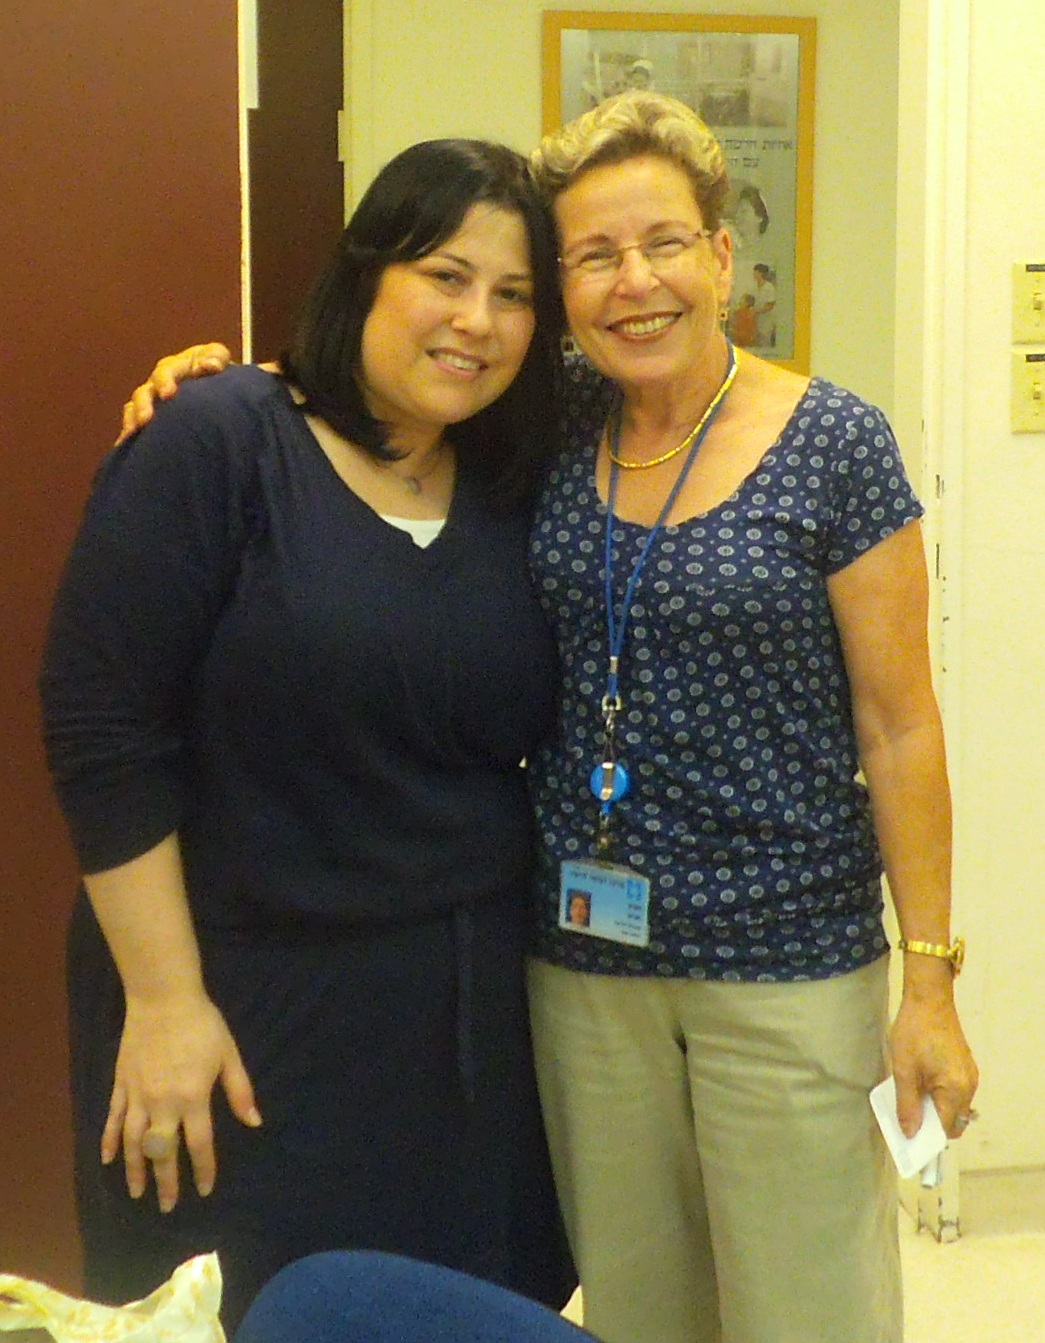 Sarri Singer, left, the assistant director of career services for Lander College for Women, with Chagit, the Hadassah Hospital nurse who cared for her 10 years ago in the aftermath of a terror attack. 